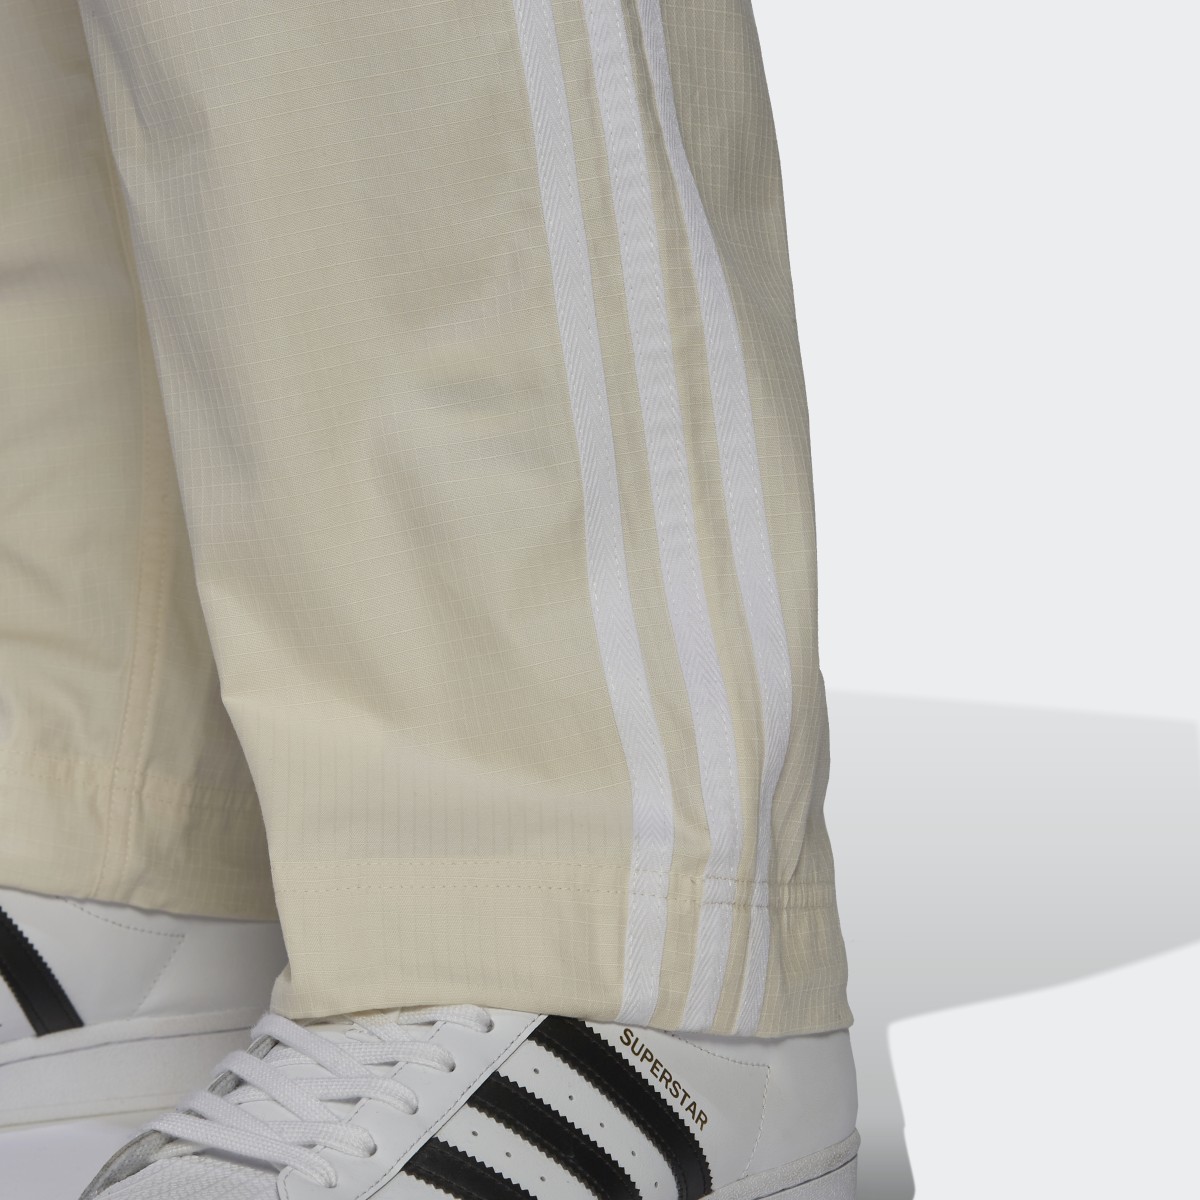 Adidas Work Trousers. 7